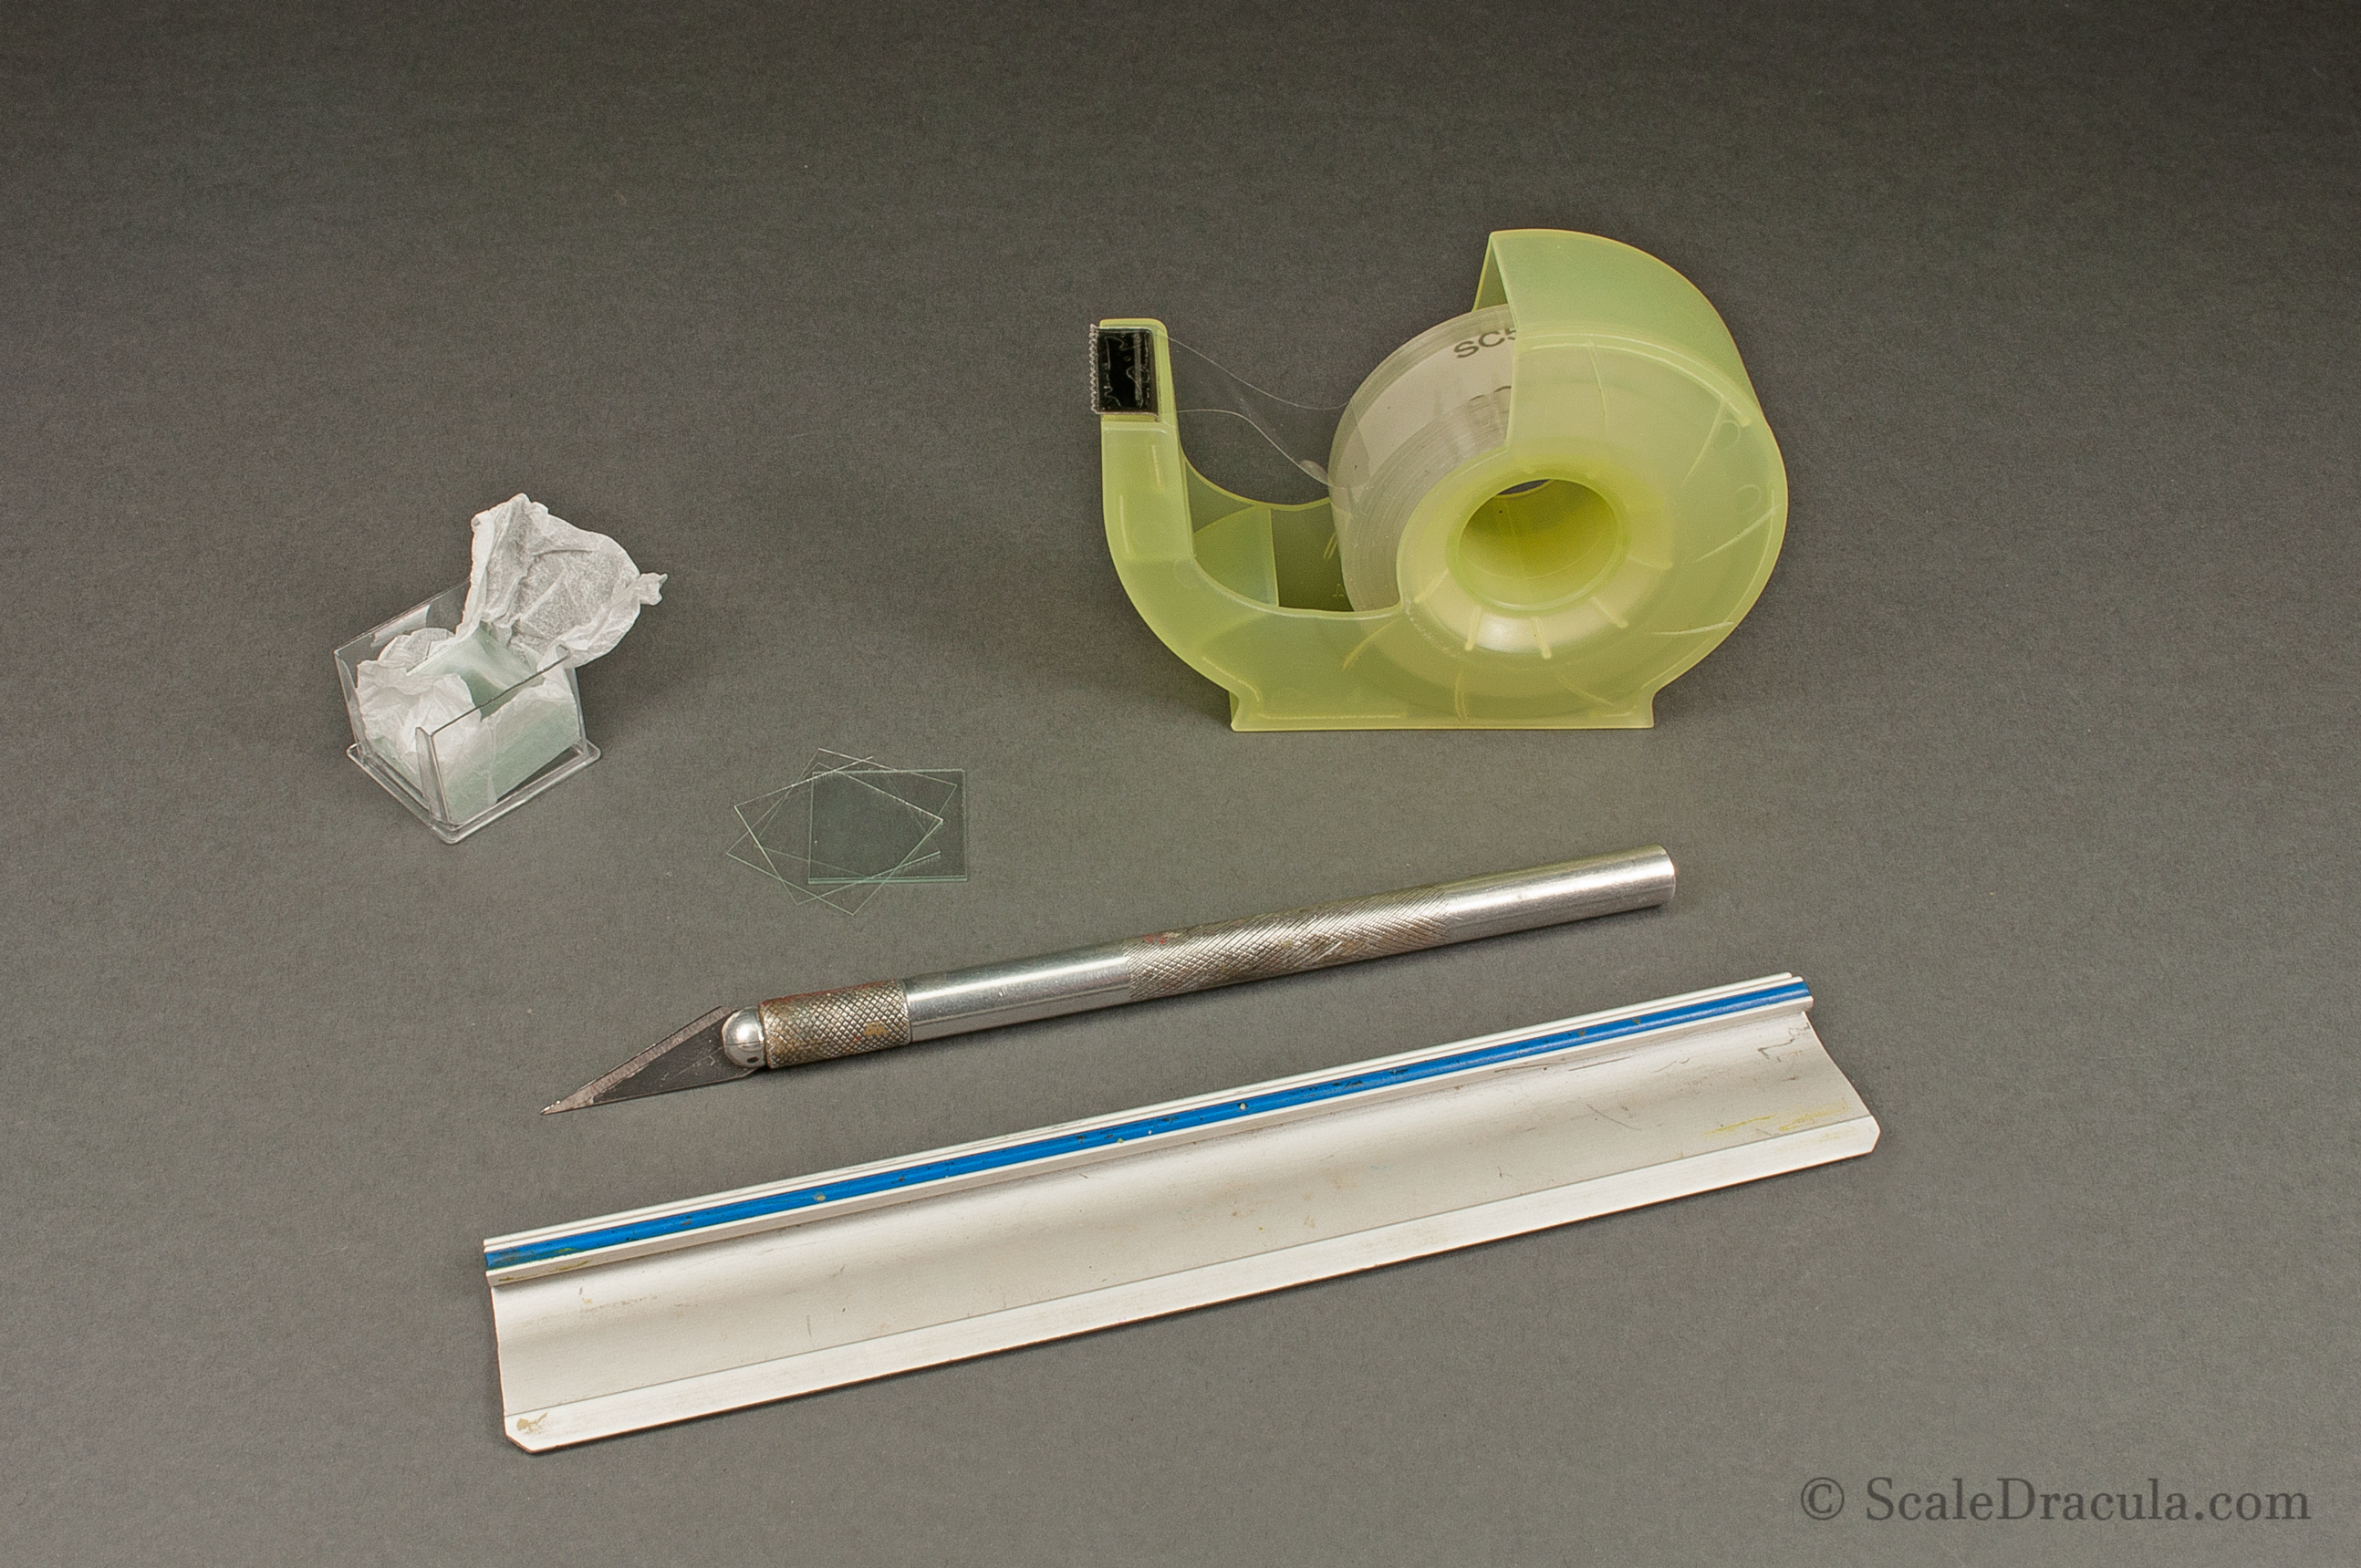 Tools, How to: make a realistic broken glass